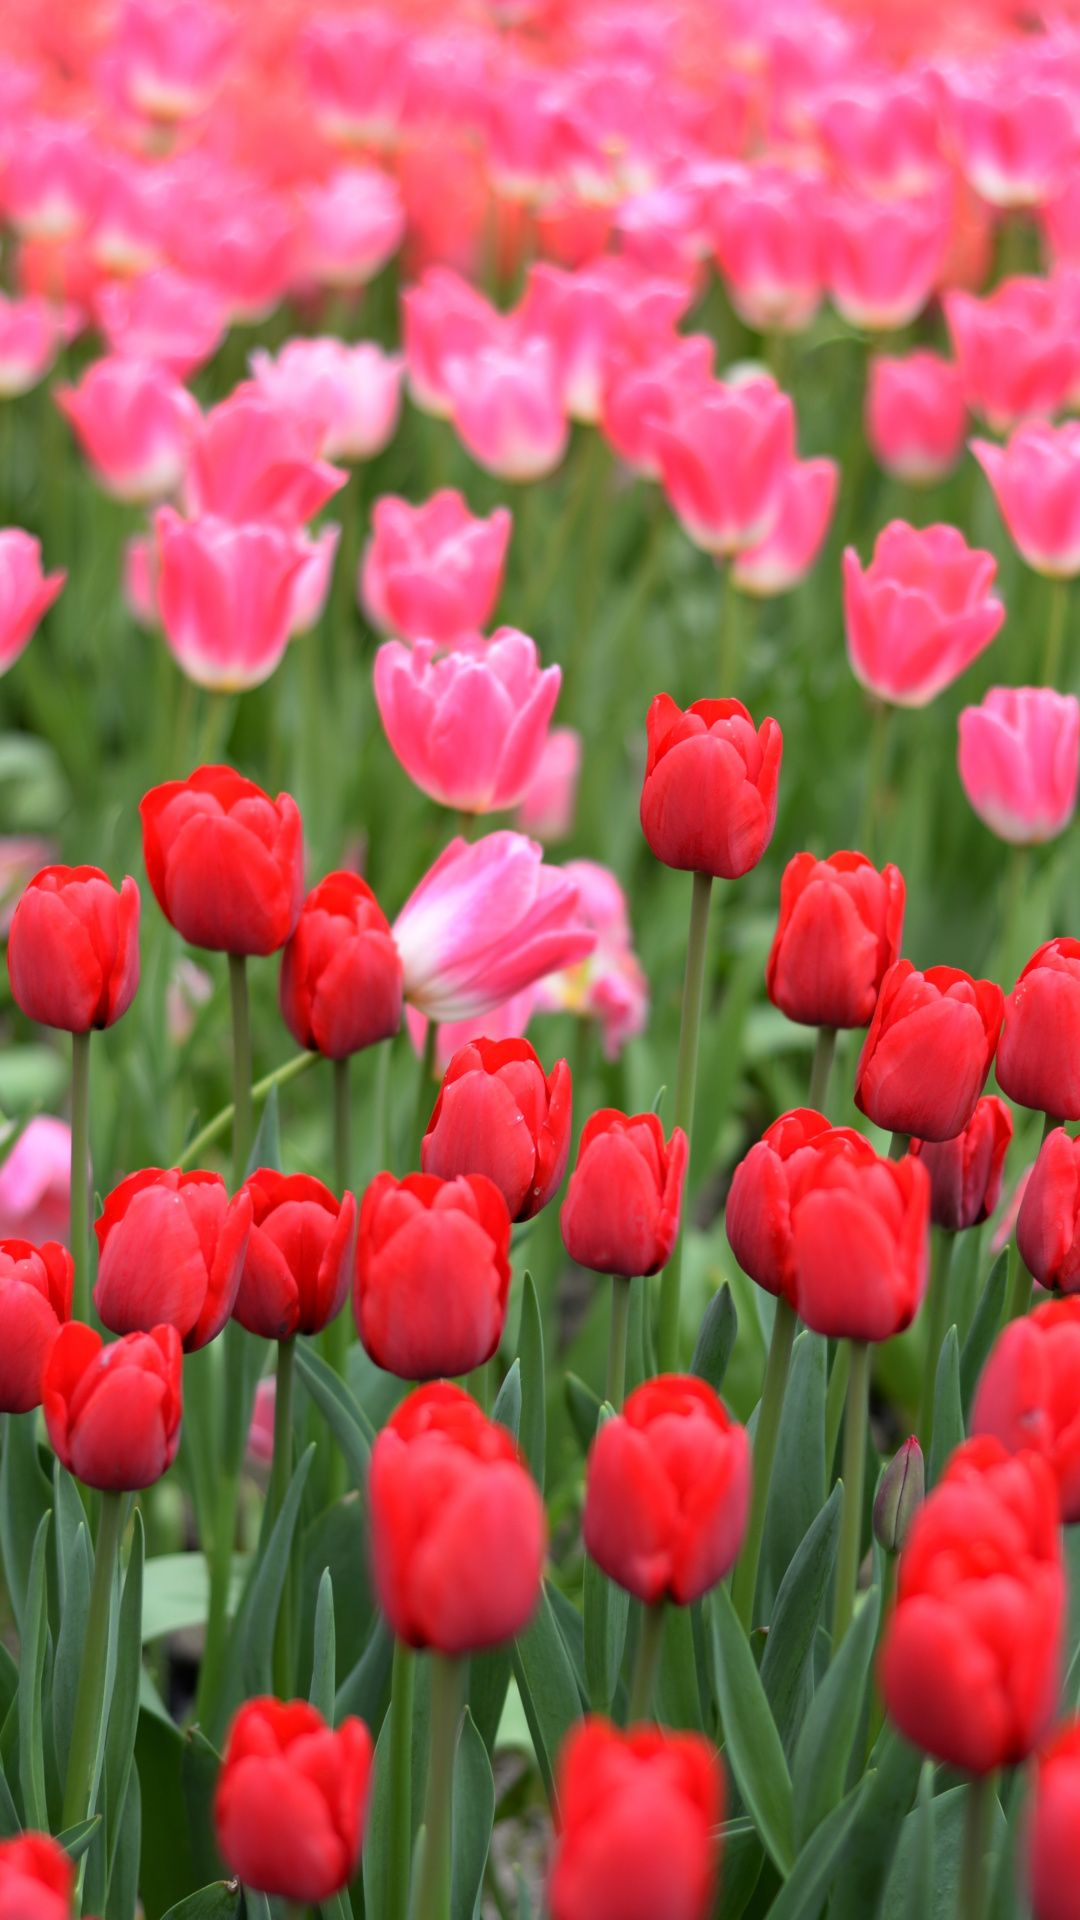 Pink and red tulips farm Wallpaper Red tulips Hd flower